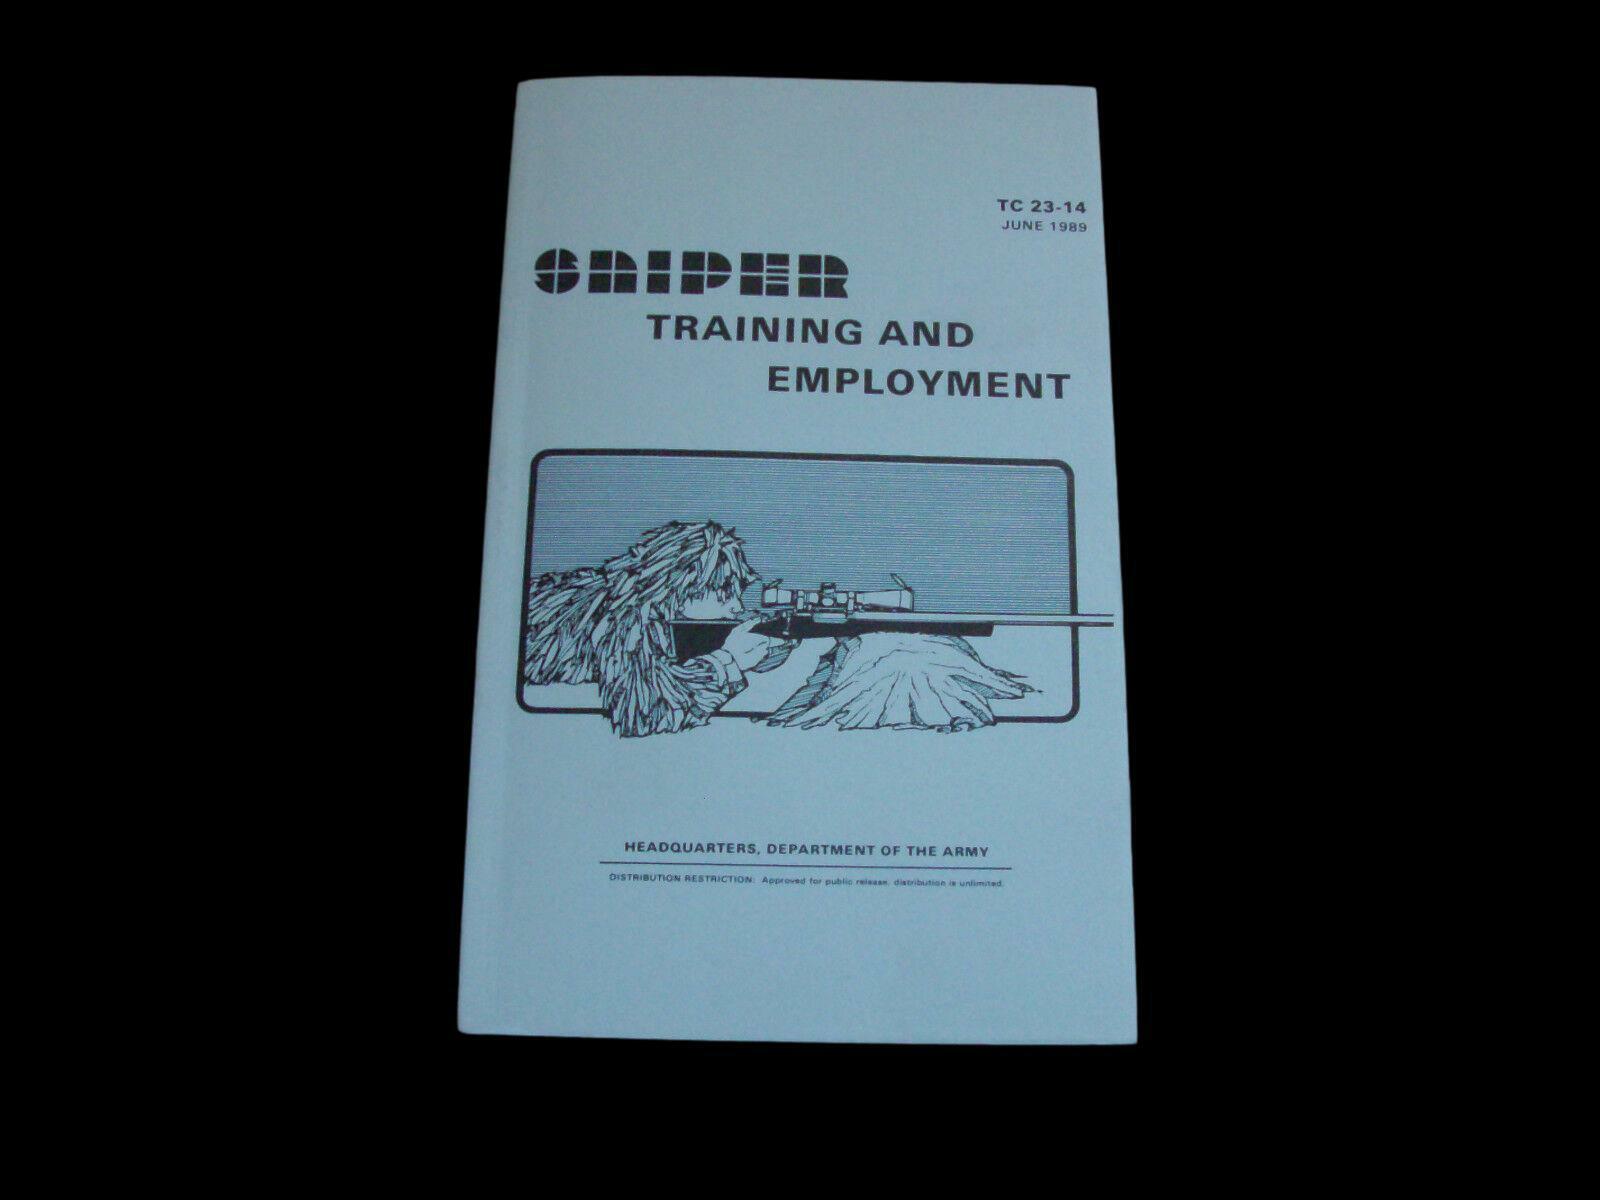 U.S ARMY SNIPER TRAINING AND EMPLOYMENT BOOK SHOOTERS GUIDE TC 23-14